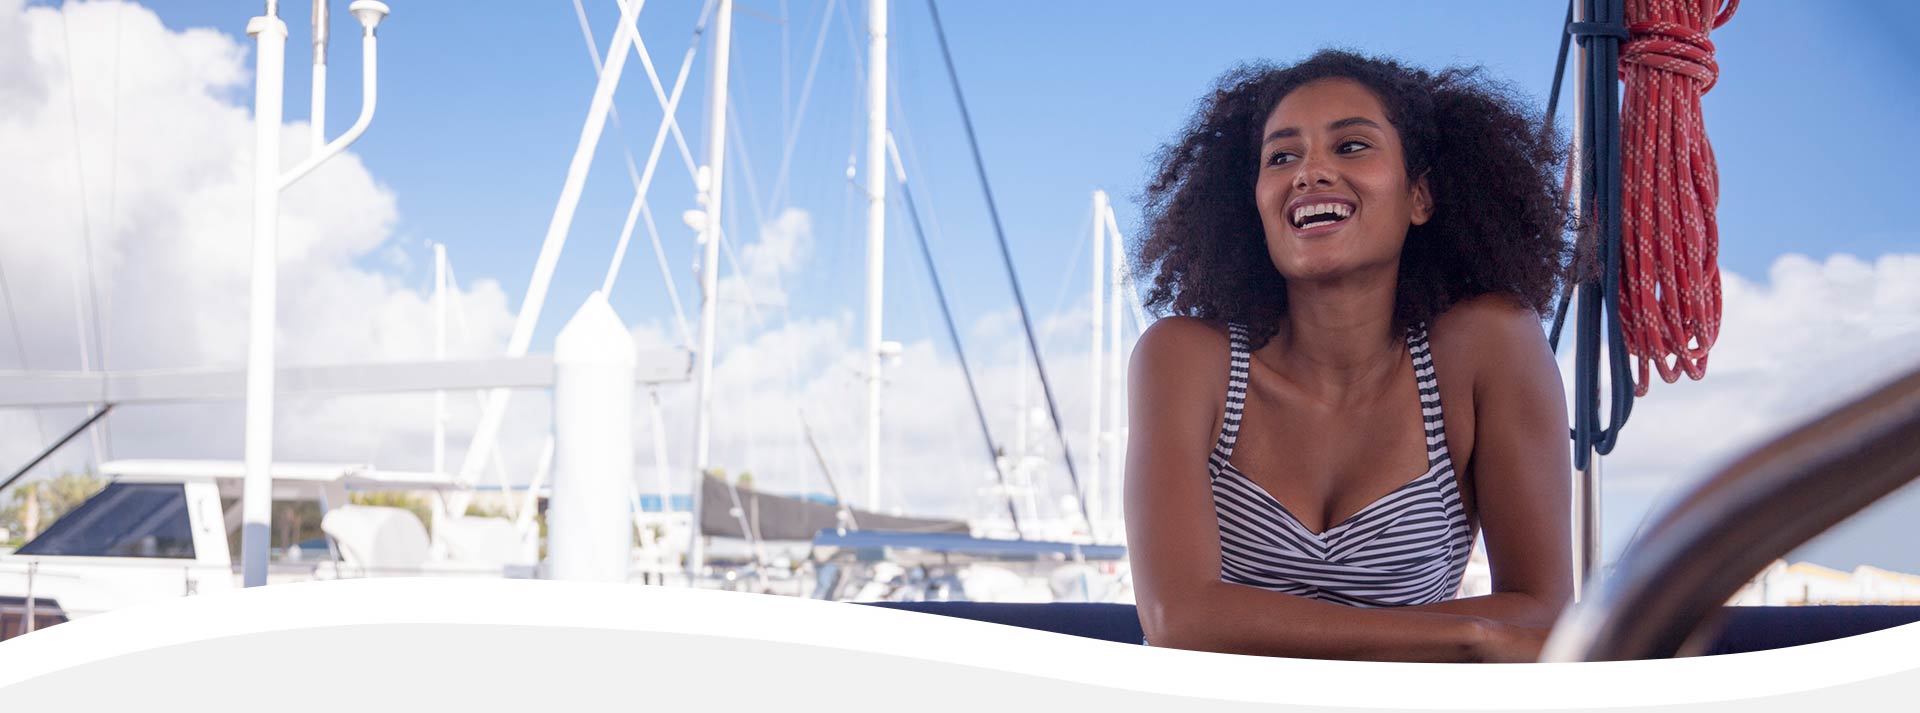 Woman on a boat smiling